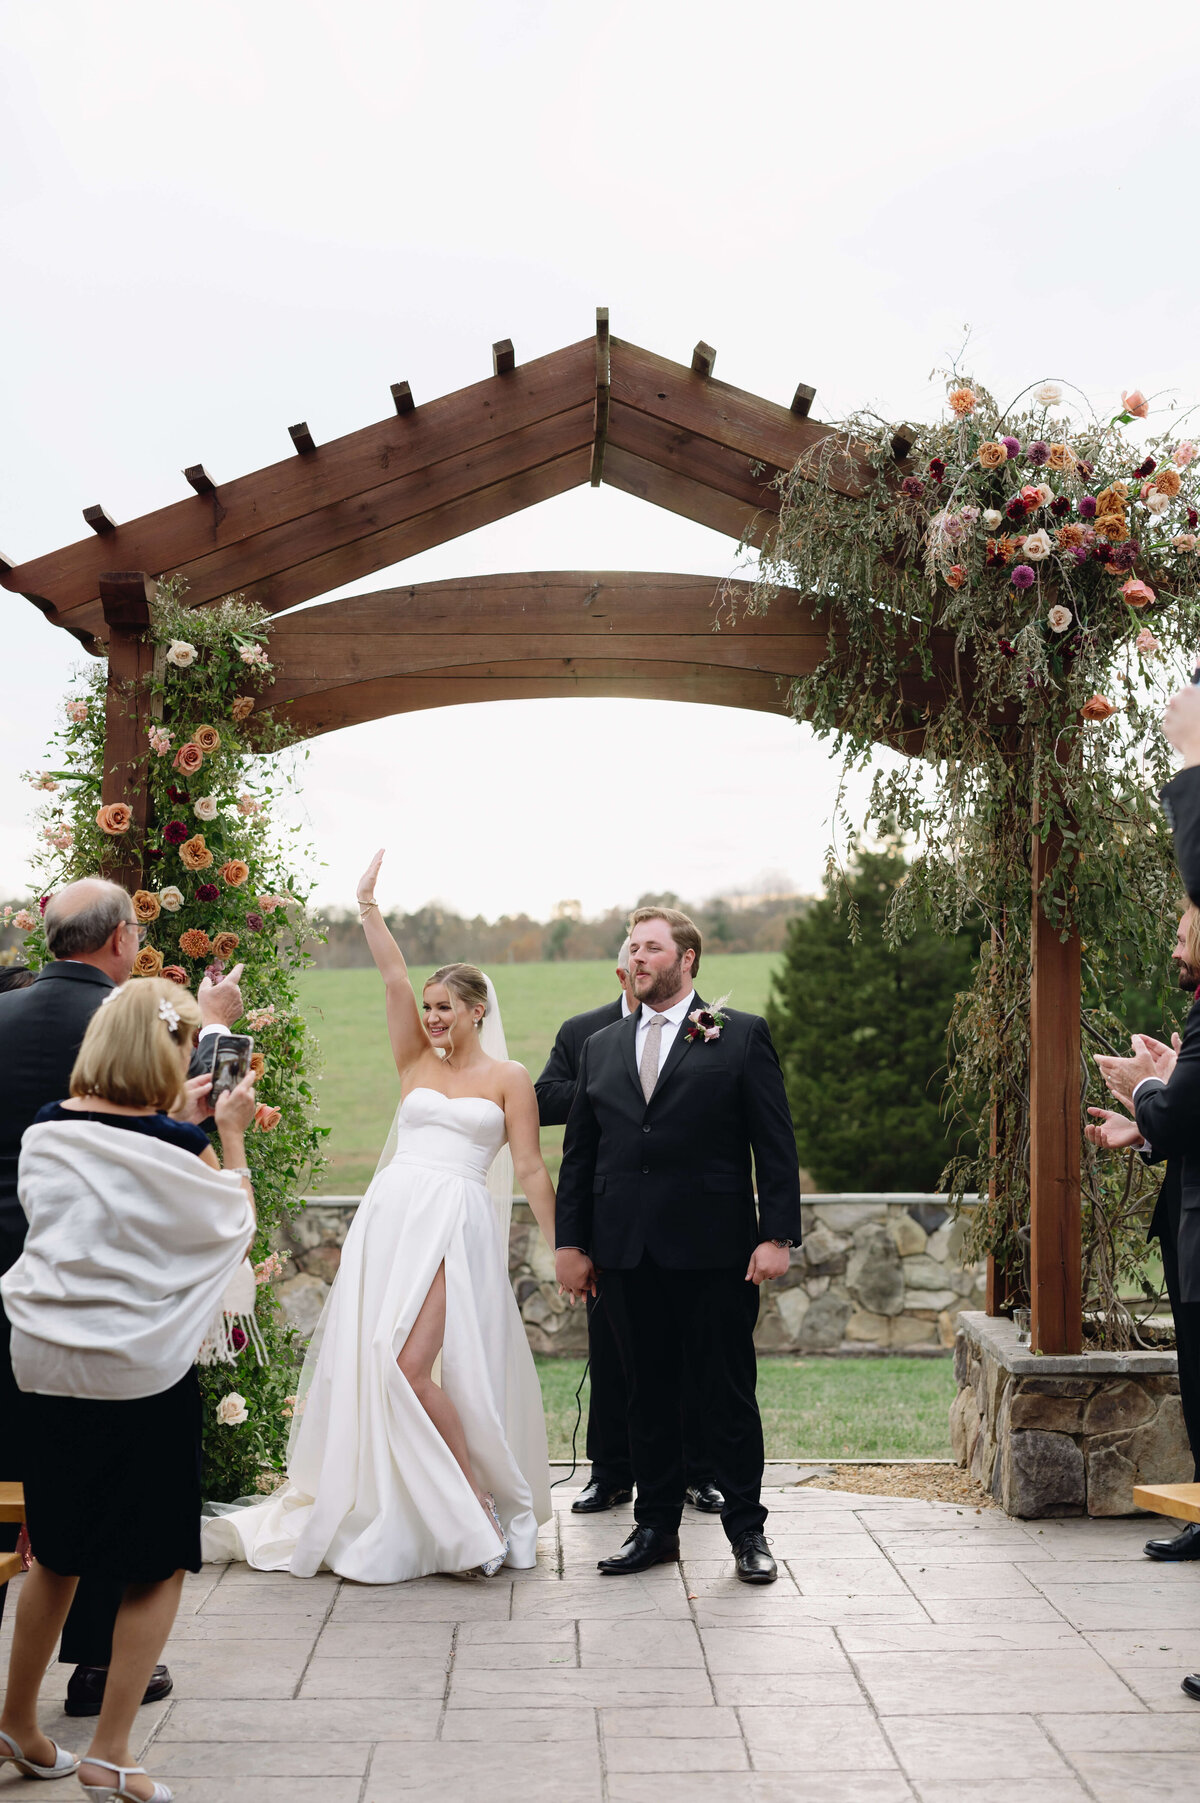 bride holding her grooms hand by her side while raising her other hand in the air in celebration with the groom smiling and grandparents taking pictures of the outdoor wedding ceremony with green hills in the distance and florals decorating the space